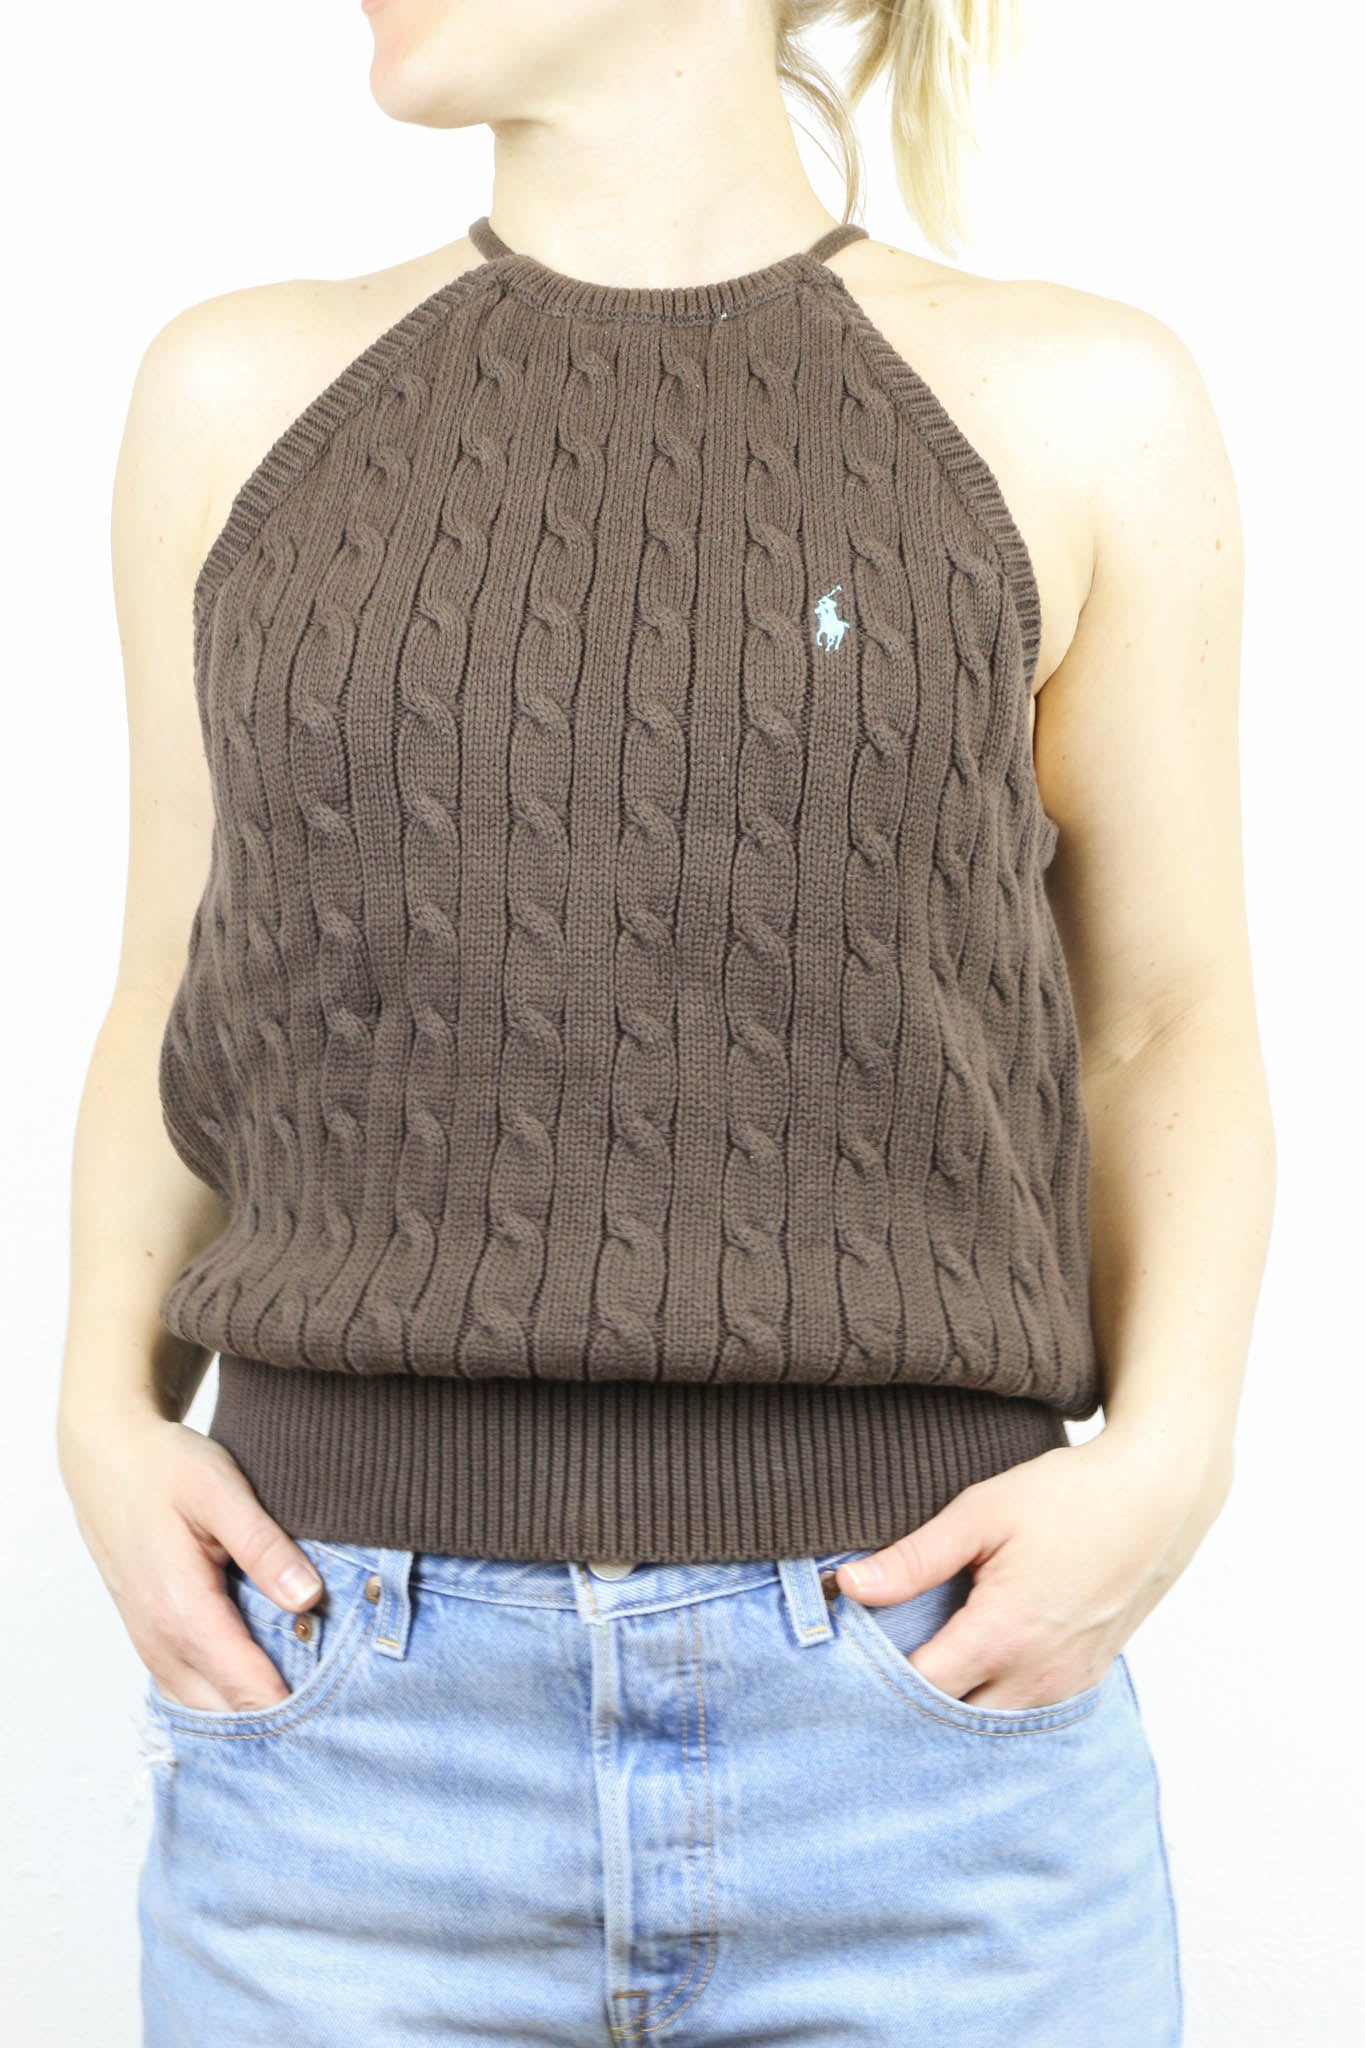 Vintage knitted top